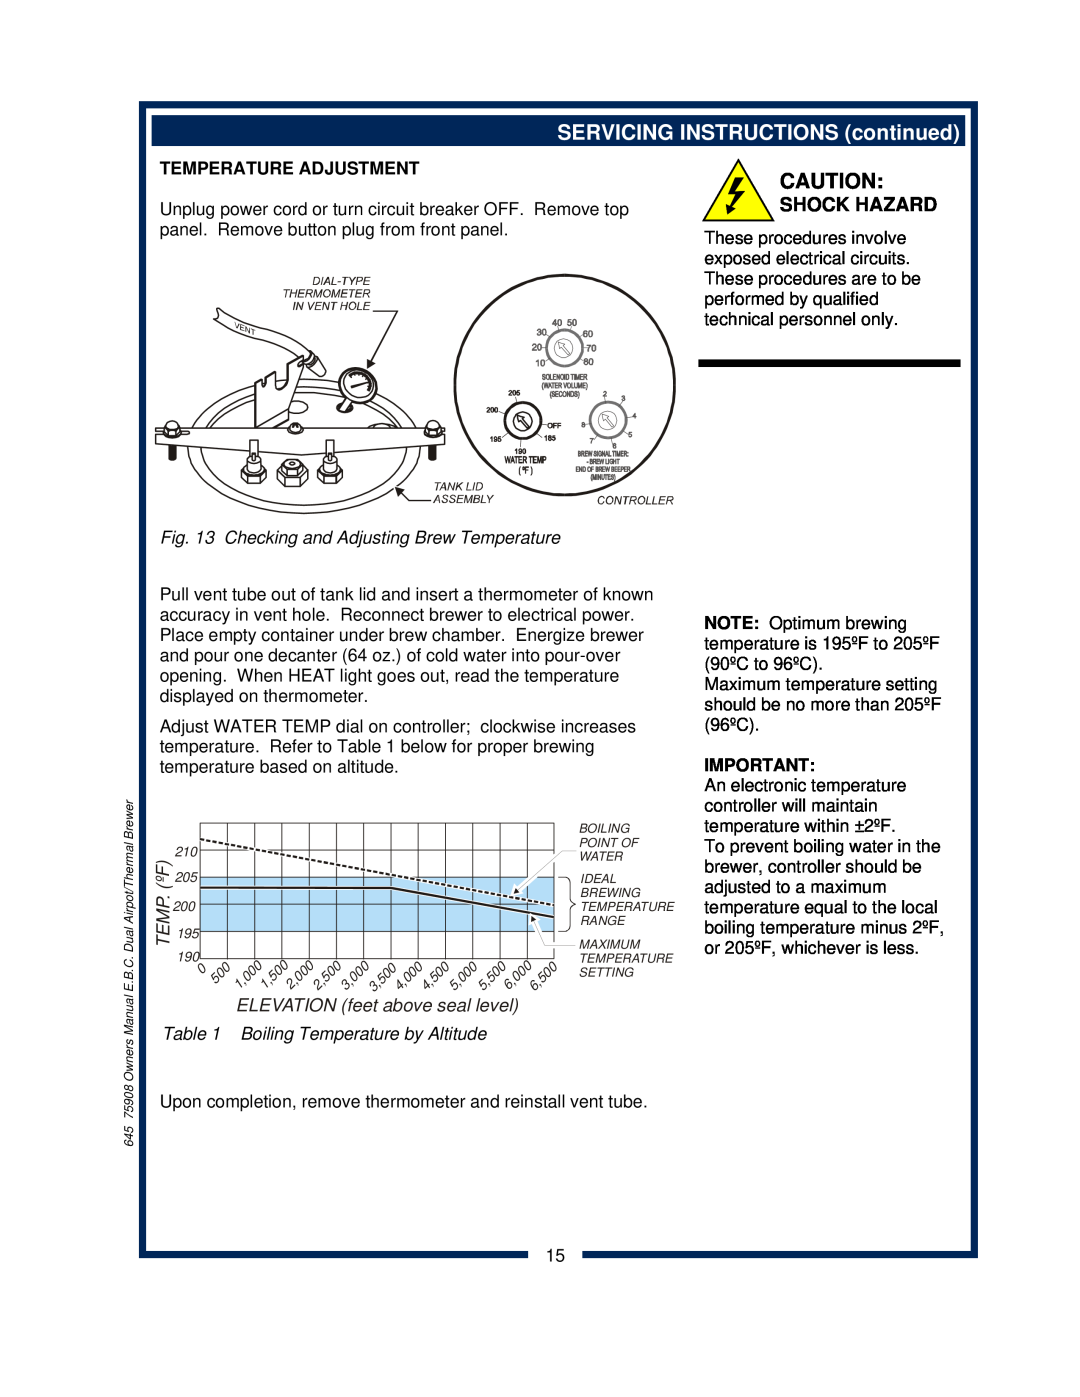 Bloomfield 1092, 1091, 1090, 1093 owner manual SERVICING INSTRUCTIONS continued, Shock Hazard, Temperature Adjustment 